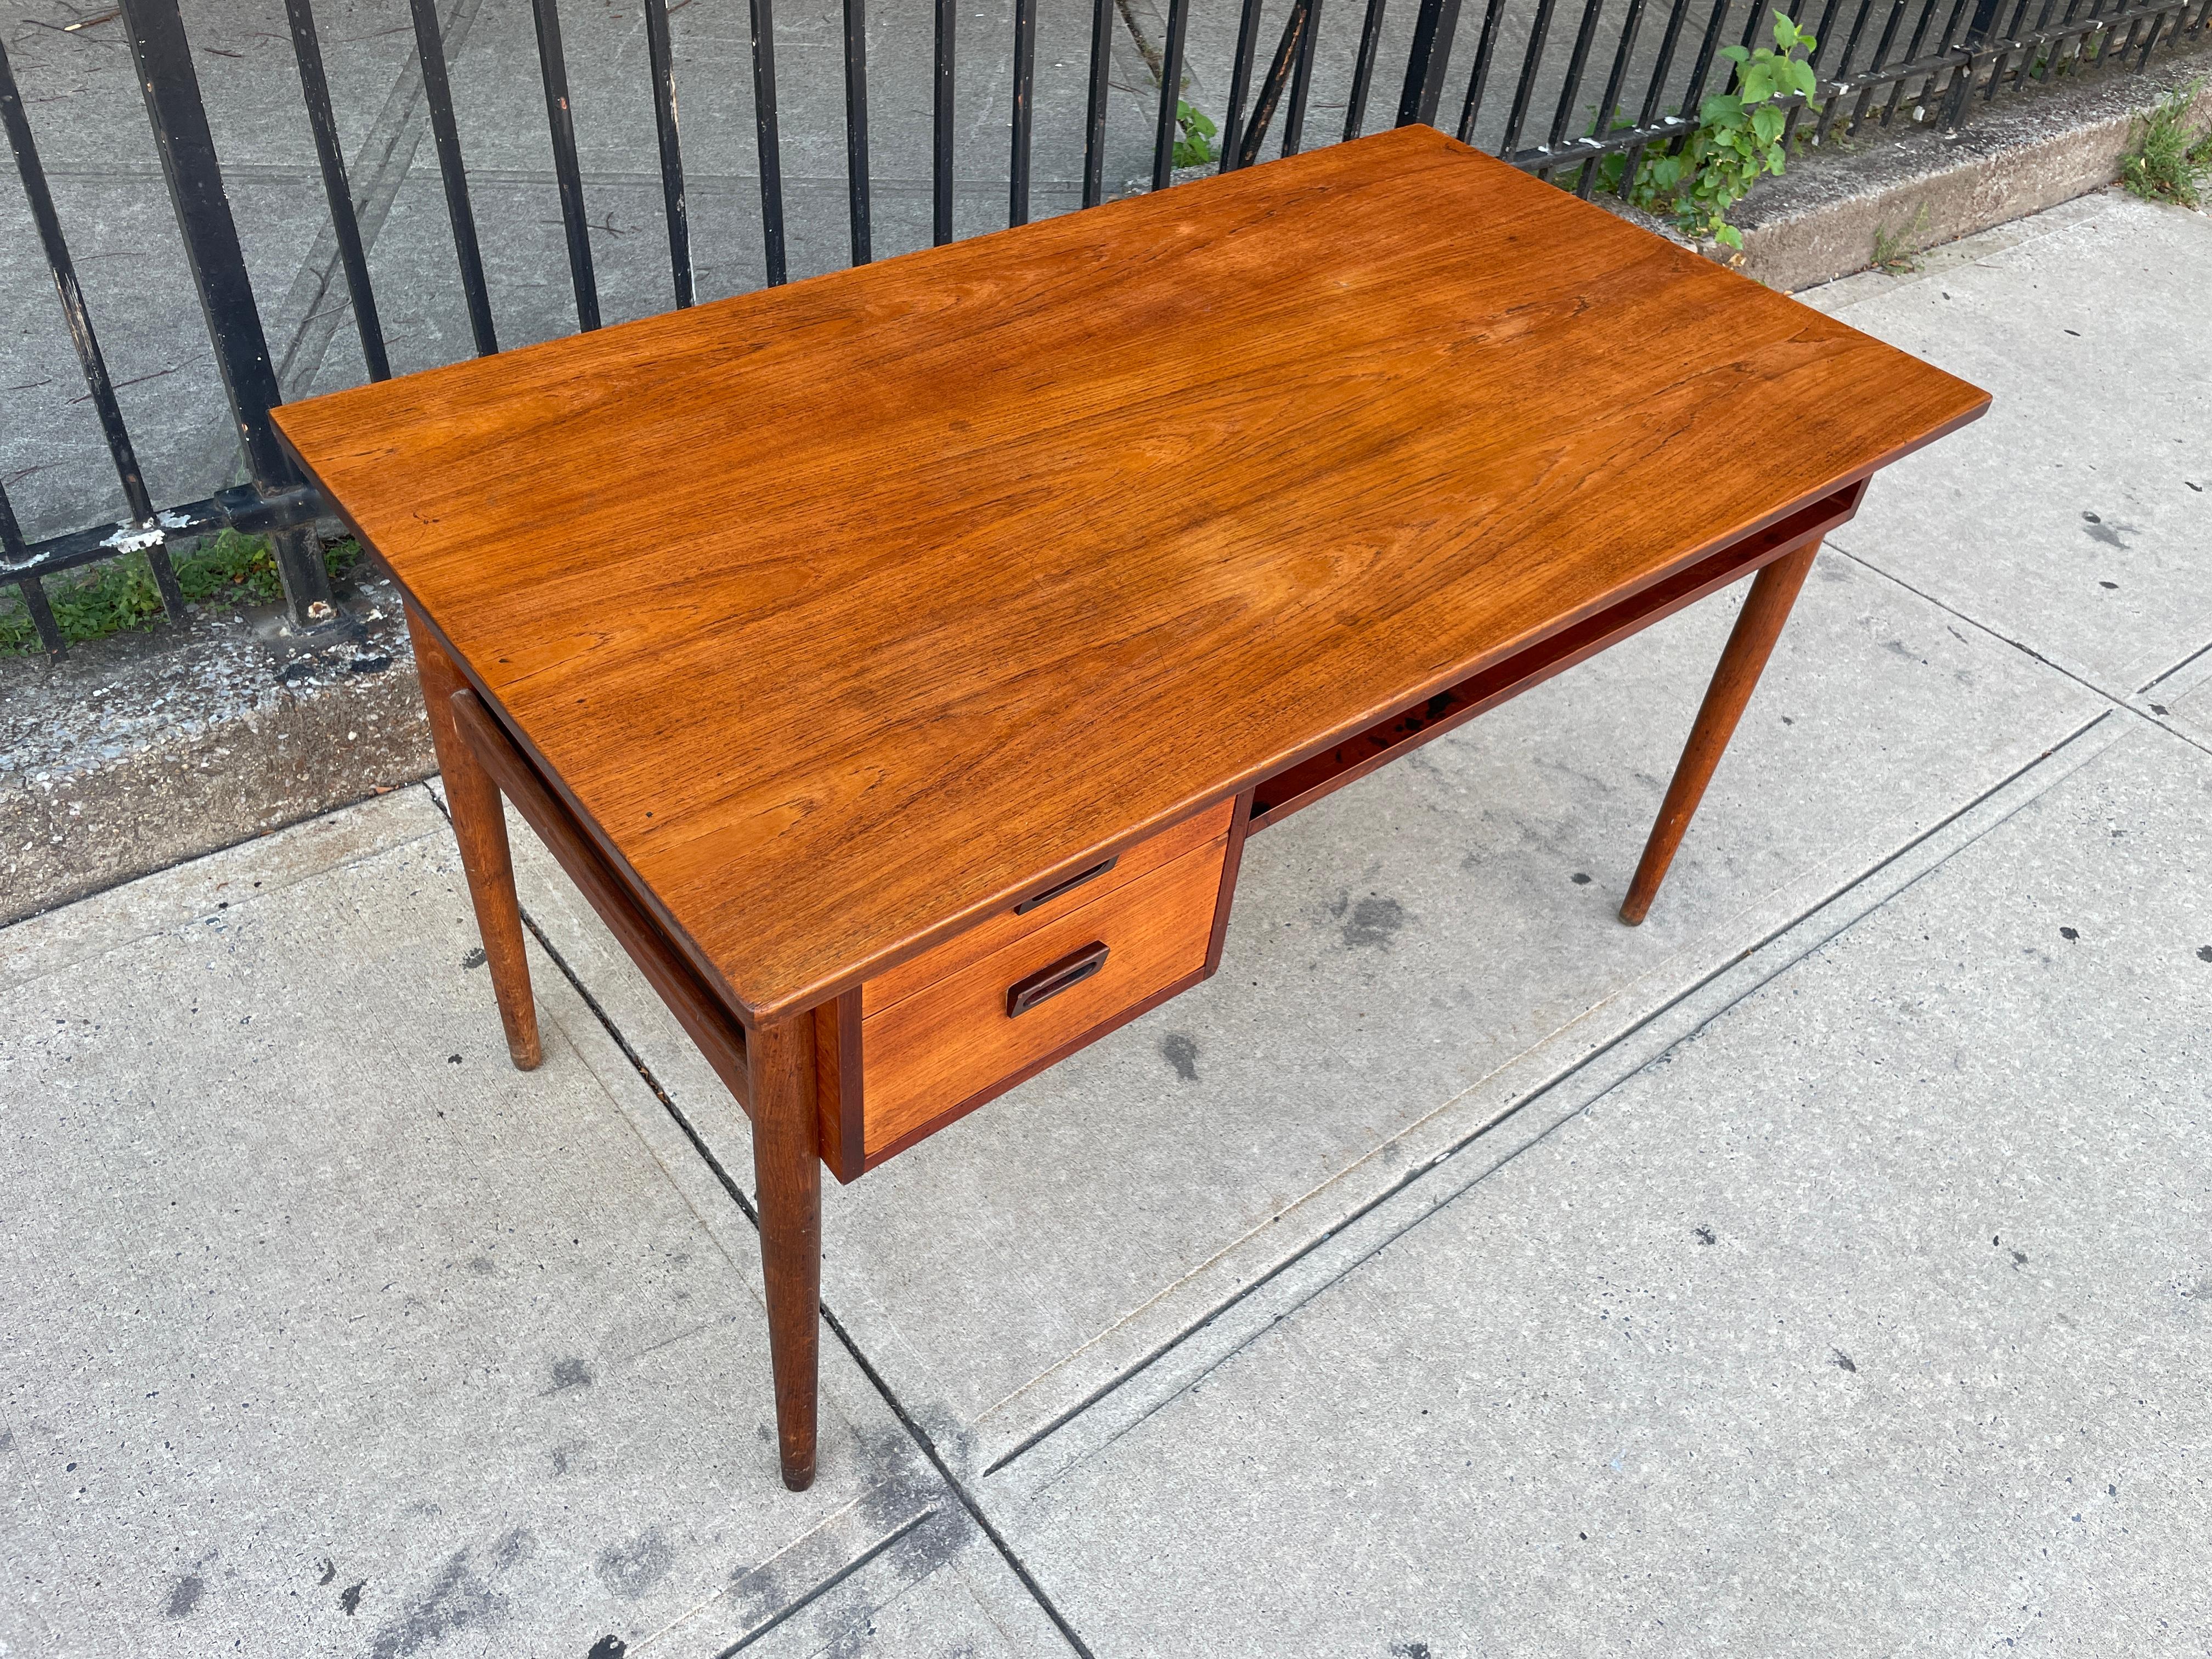 Great teak mid century Danish modern desk with 2 drawers with carved wooden handles. Danish design. Has a small shelf on the front side of desk and has a long open shelf that runs under the entire desk. made in Denmark. Located in Brooklyn NYC.